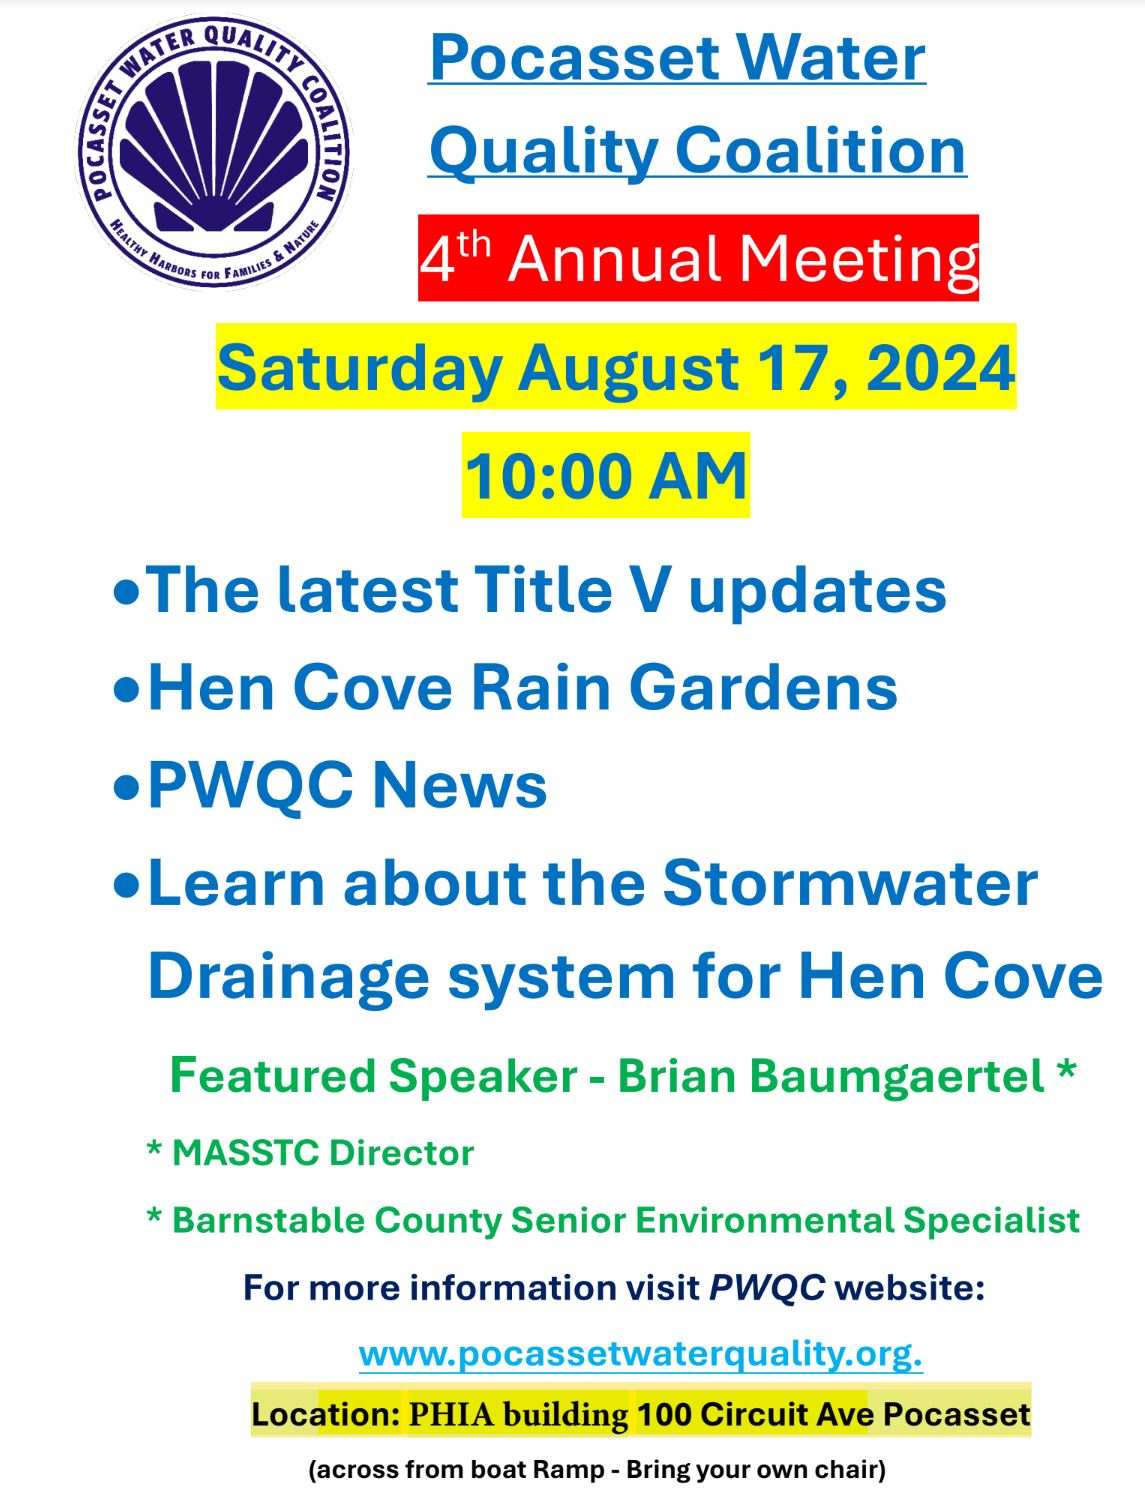 Pocasset Water Quality Coalition Annual Meeting